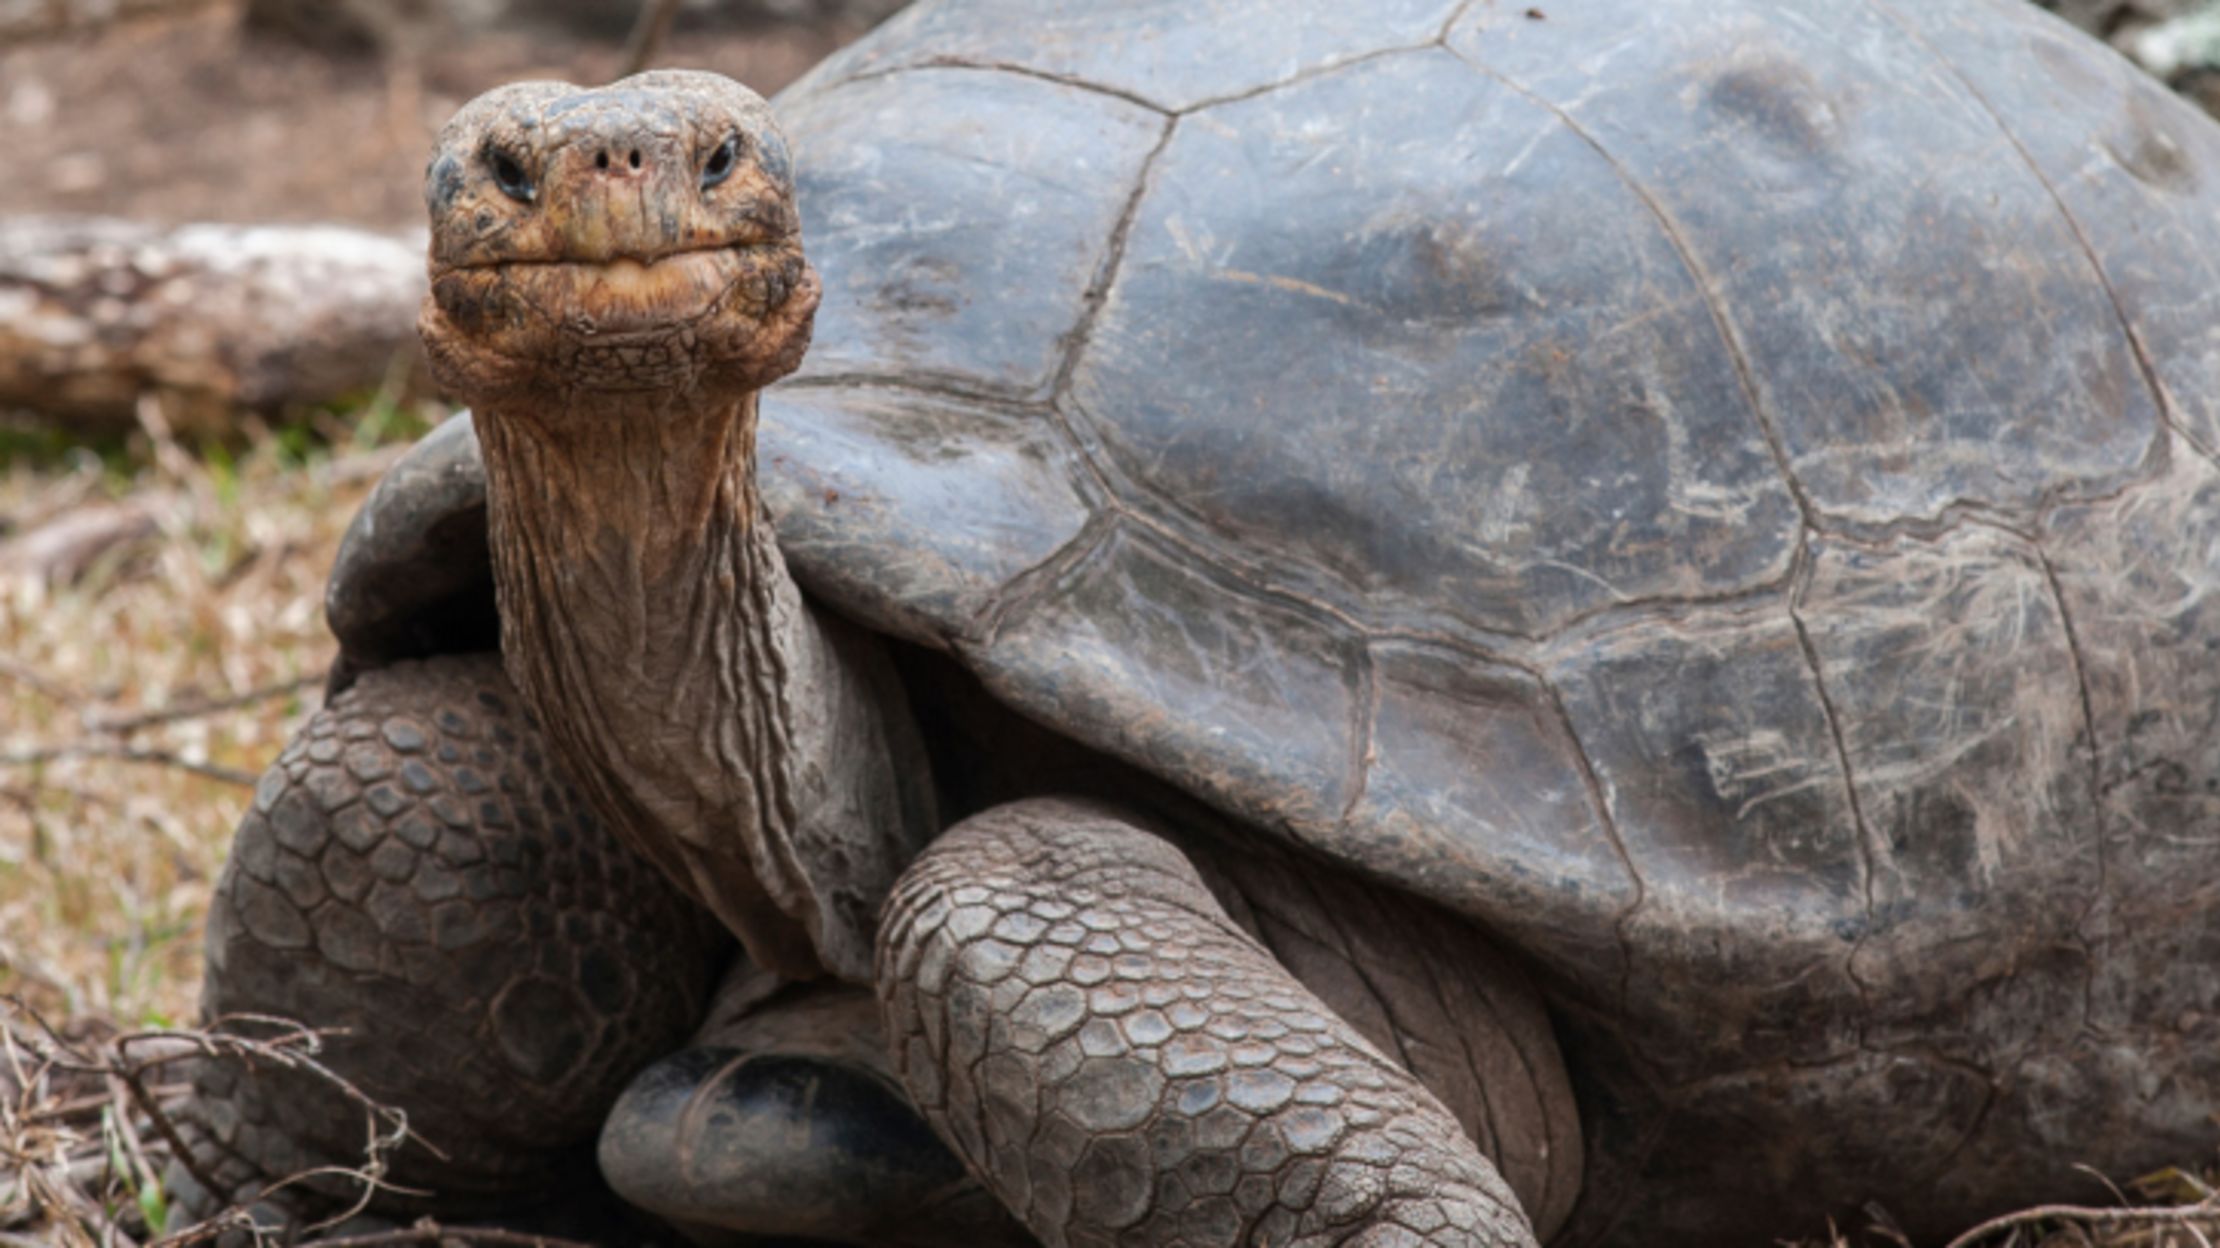 16 Fun Facts About Tortoises | Mental Floss